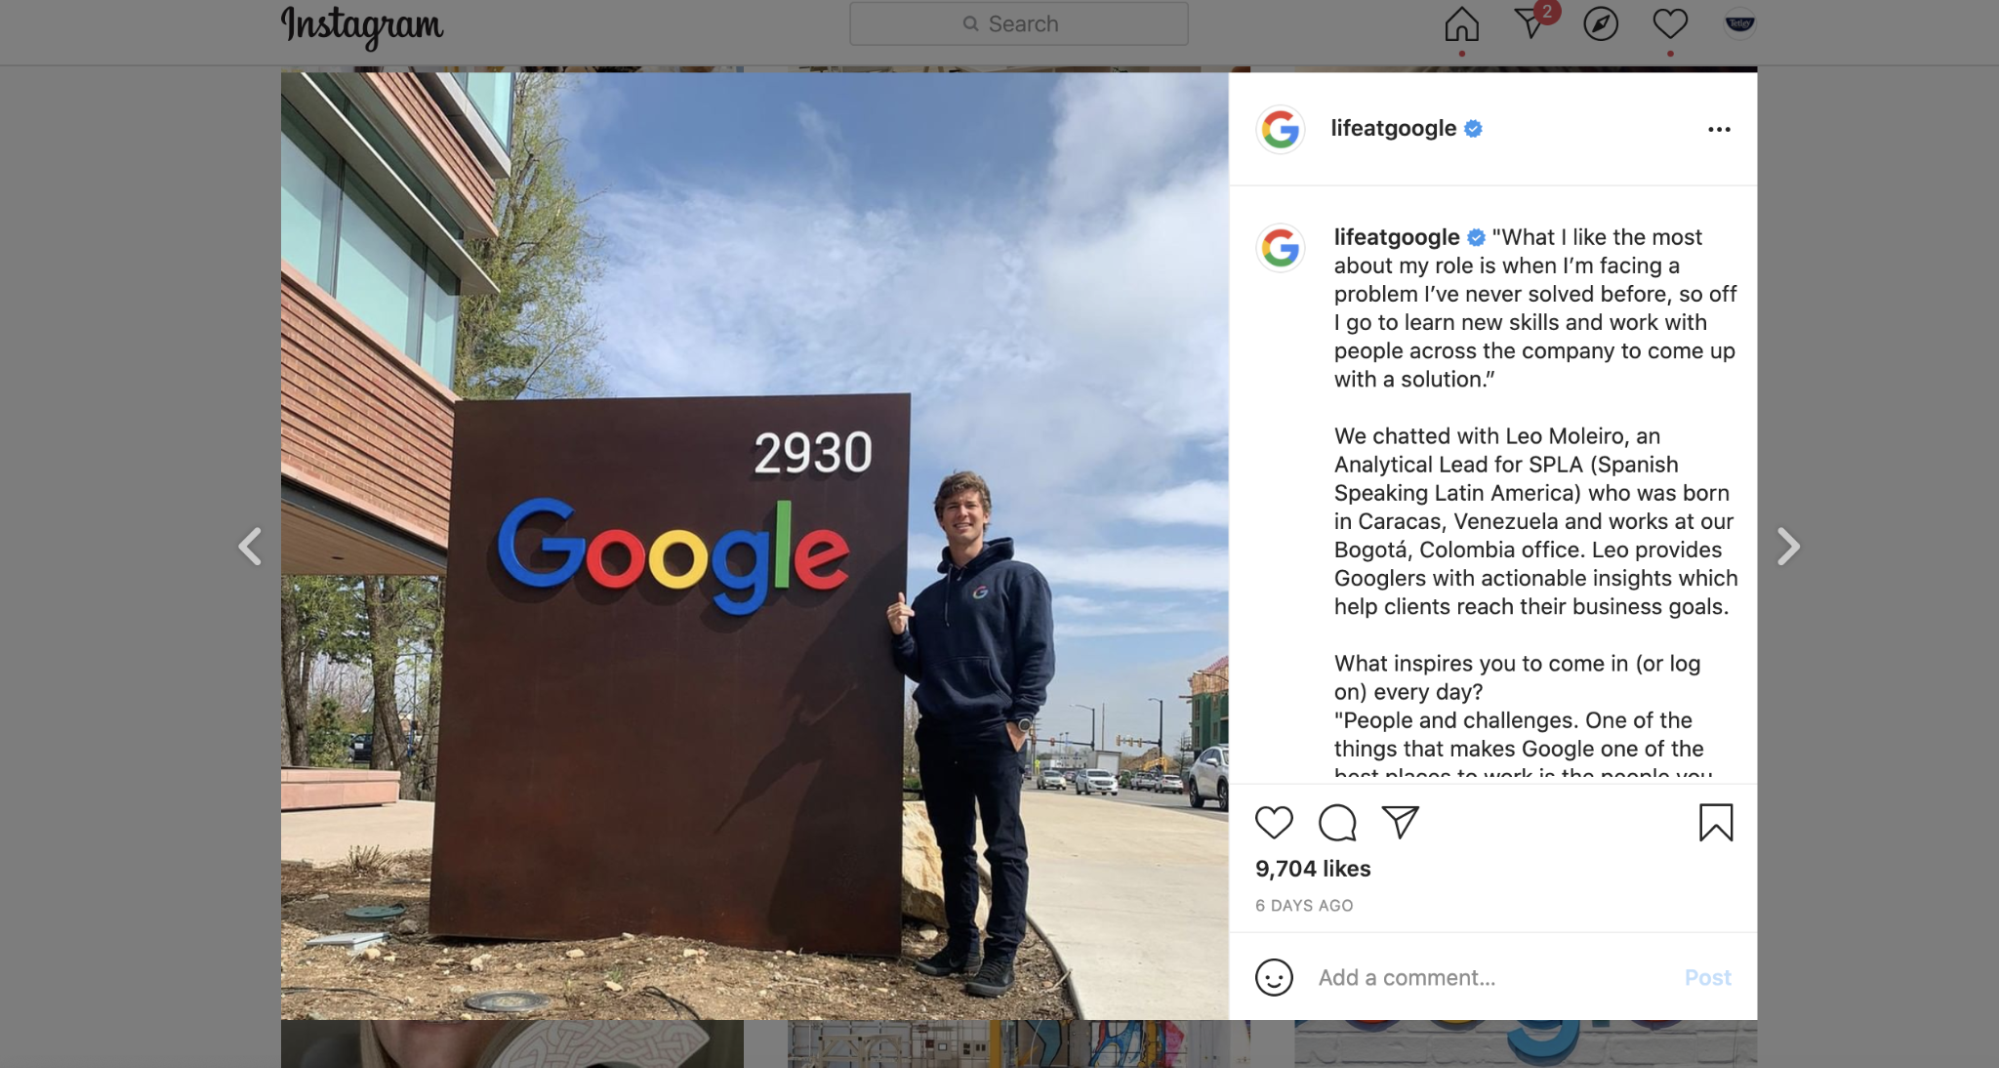 An Instagram post on the lifeatgoogle account, which features a quote from an employee